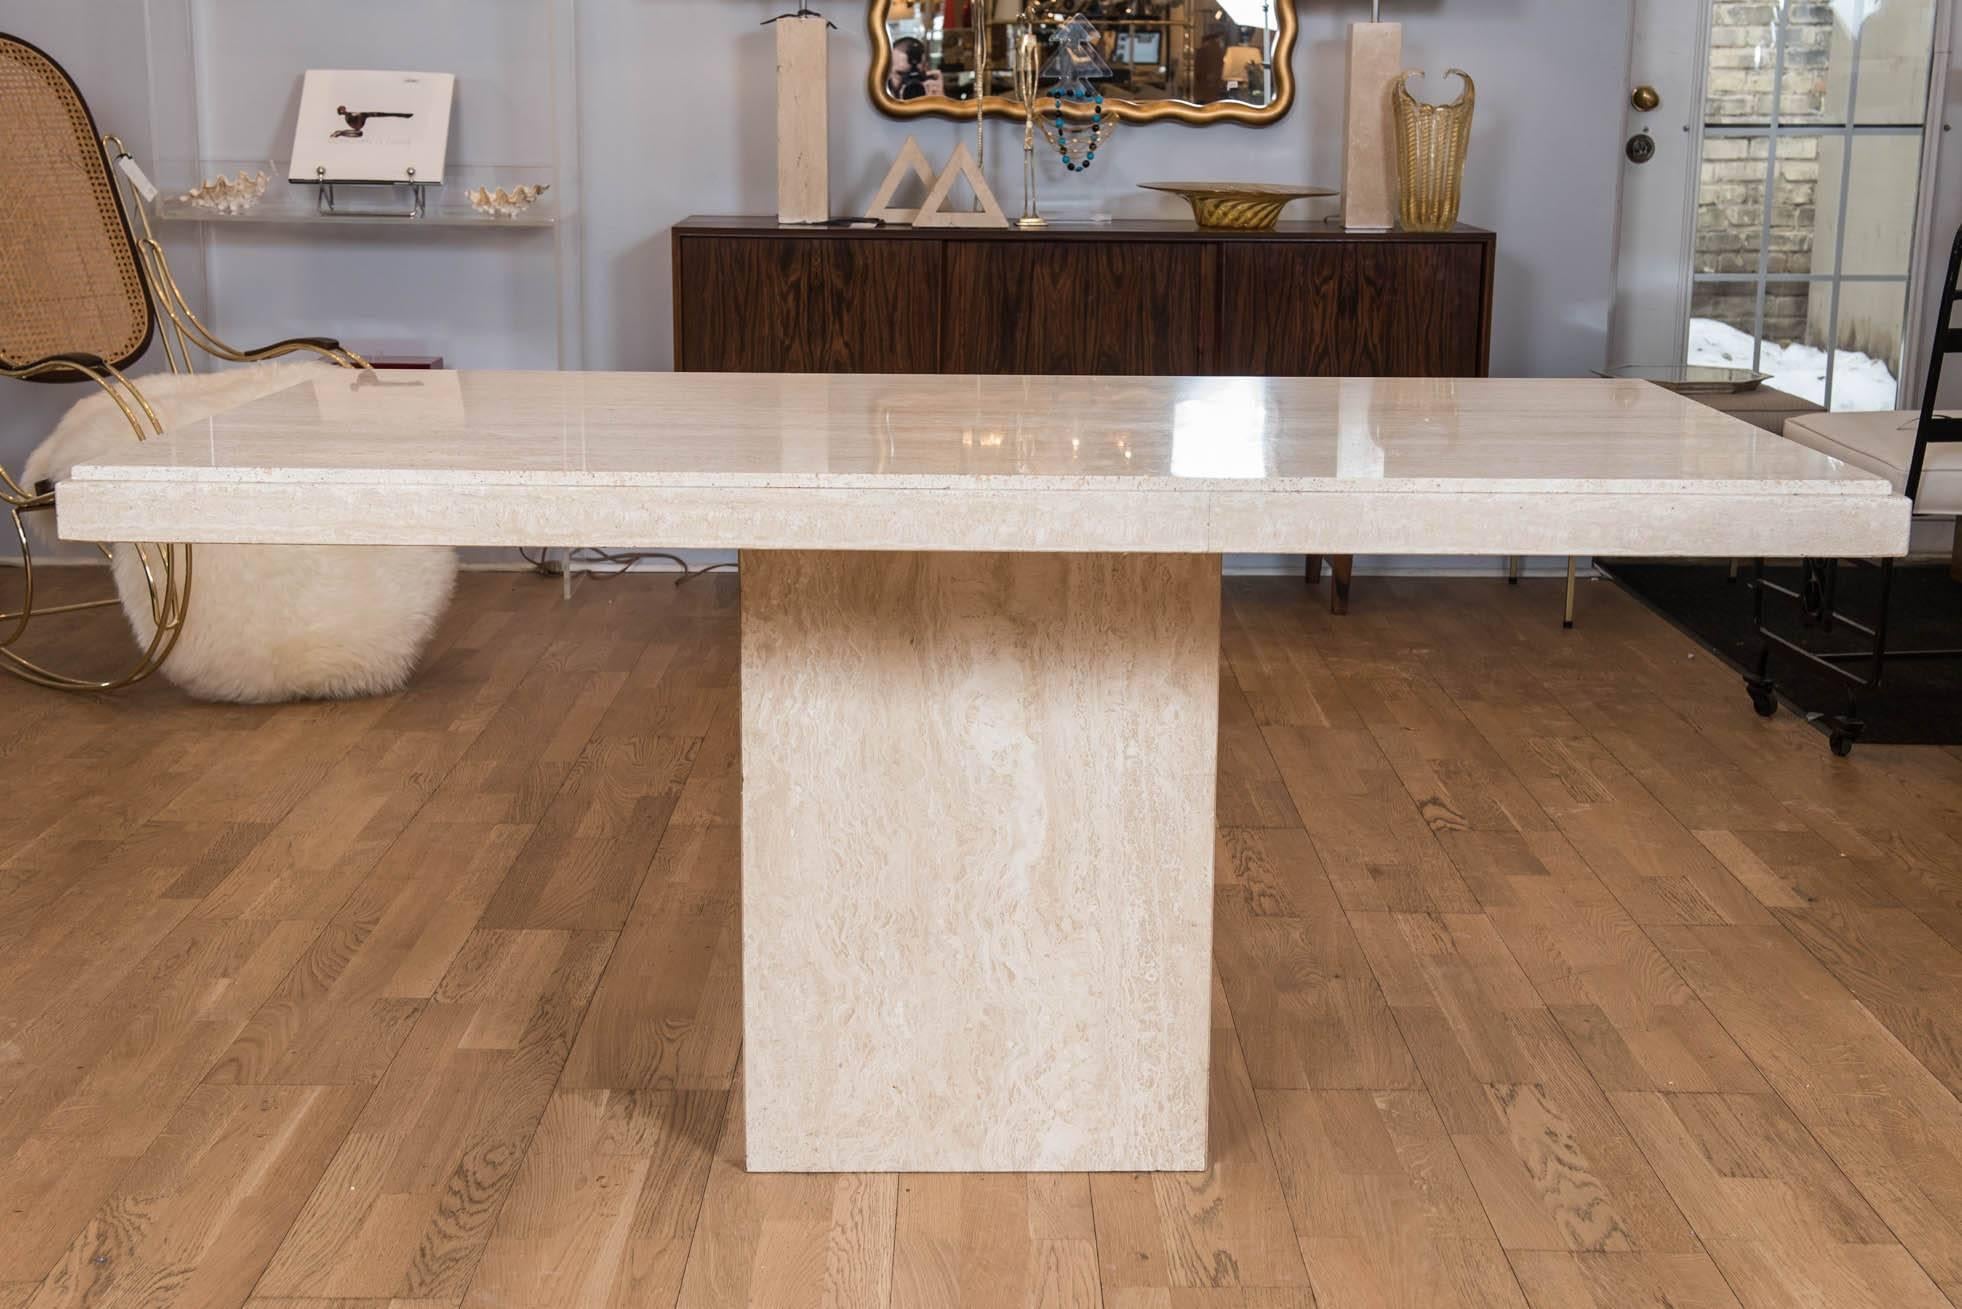 This handsome simple yet stylish vintage custom travertine limestone table is perfect as a breakfast table, desk or center hall piece. The double edged step-back top fits snuggly on a single pedestal and can be removed for transportation.